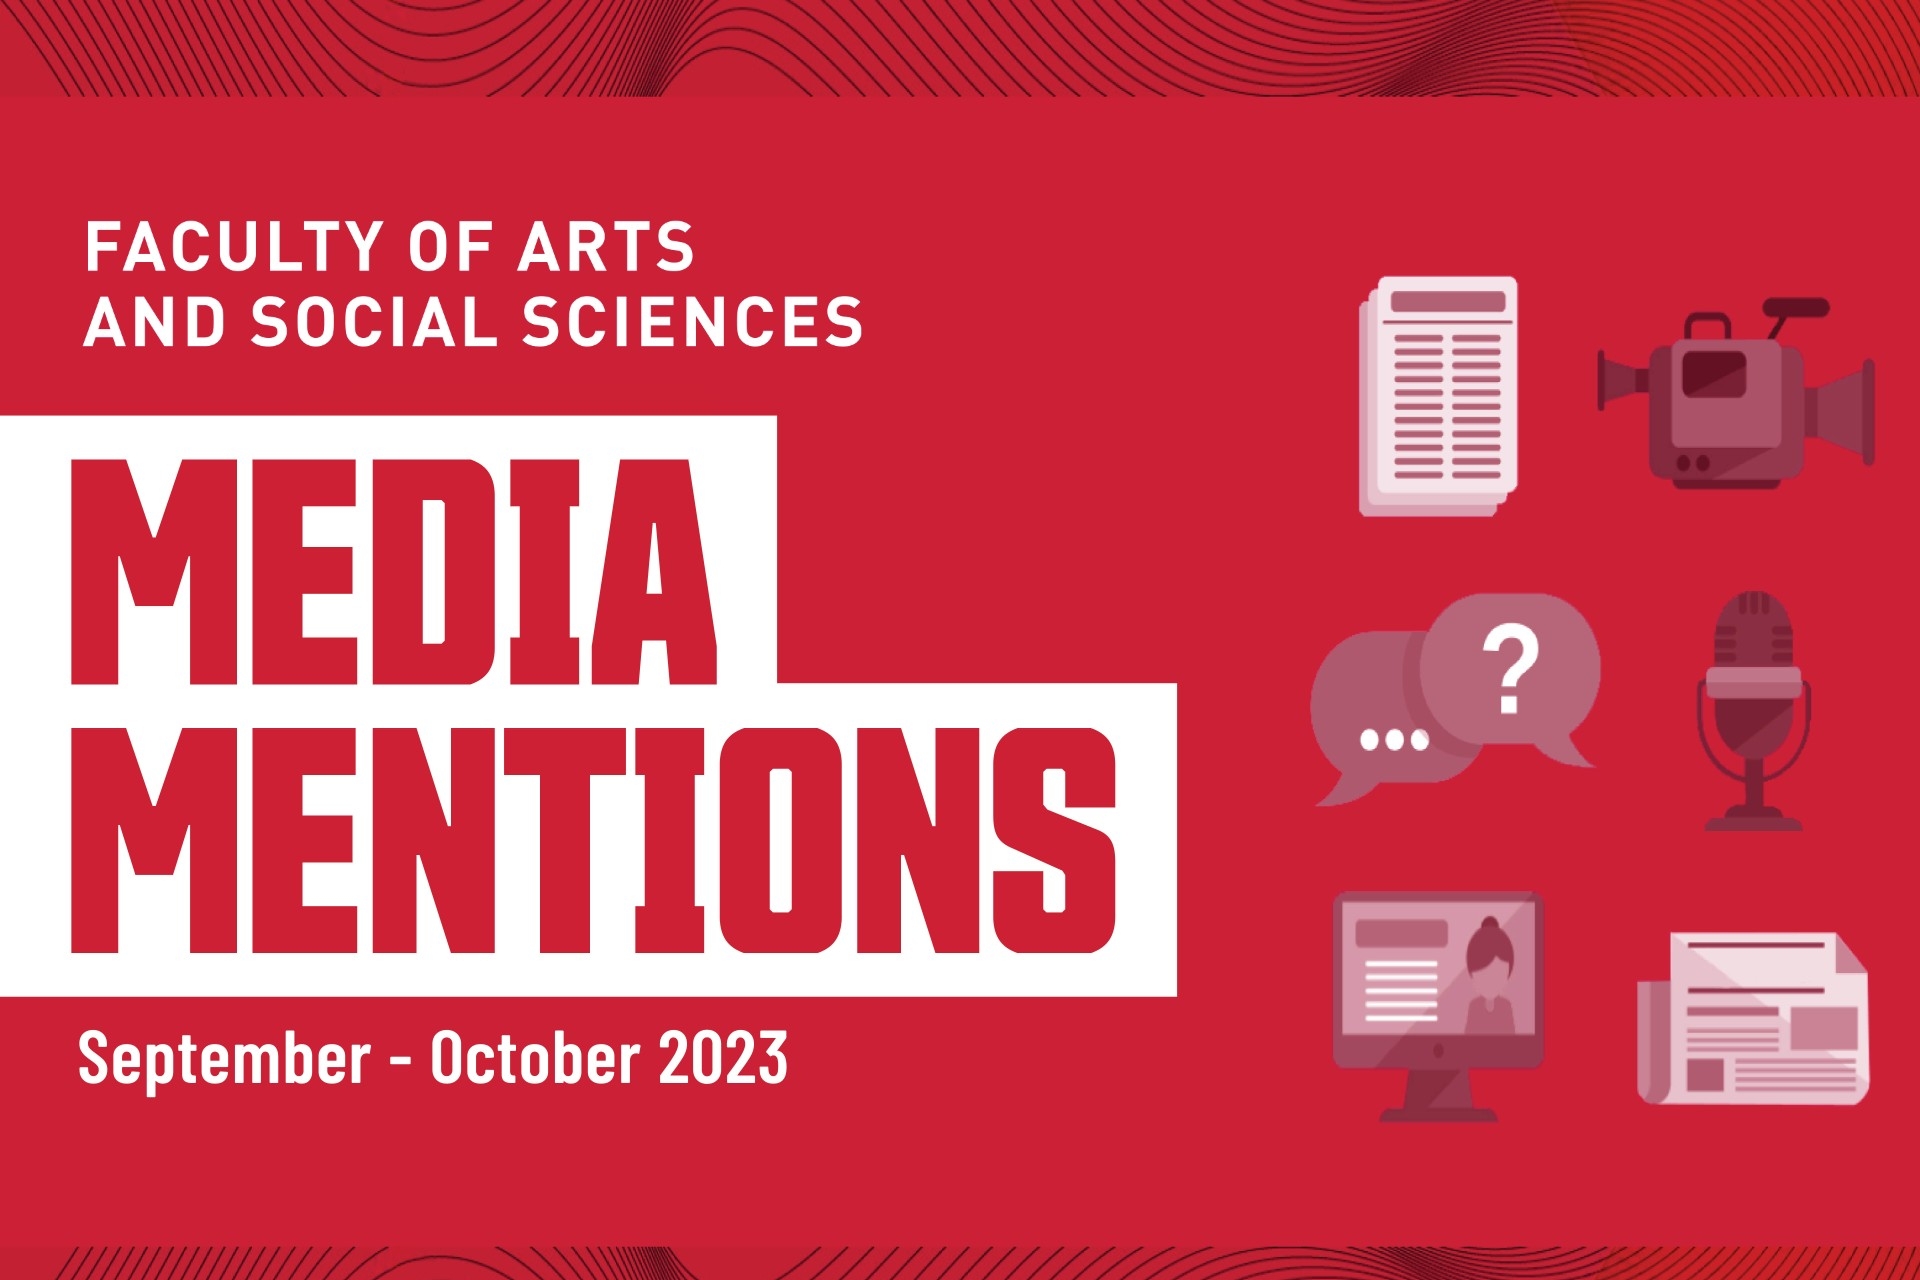 Red background with various news icons including a document, videocamera, chat bubbles, microphone, computer monitor, and a newspaper.  Red text reads MEDIA MENTIONS September-October 2023